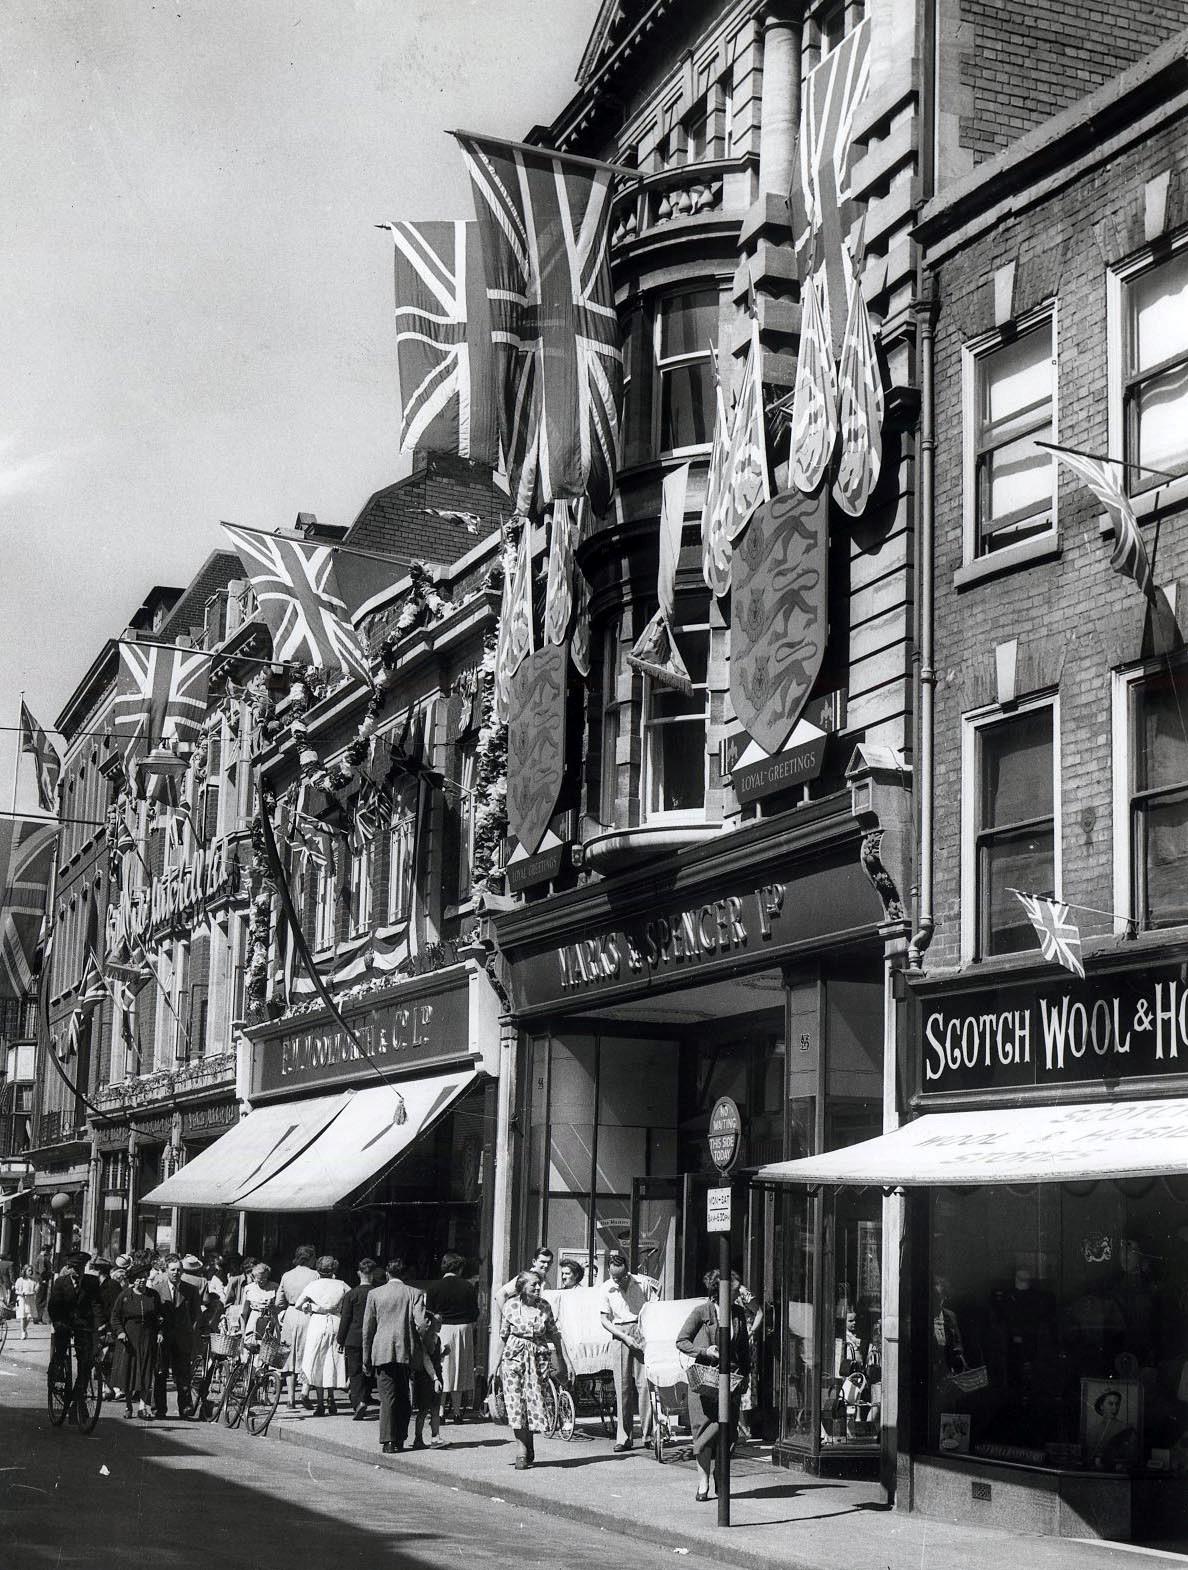 Woolworth’s in the post-war period, possibly the 1950s, though I am not sure of the occasion for royal flag flying